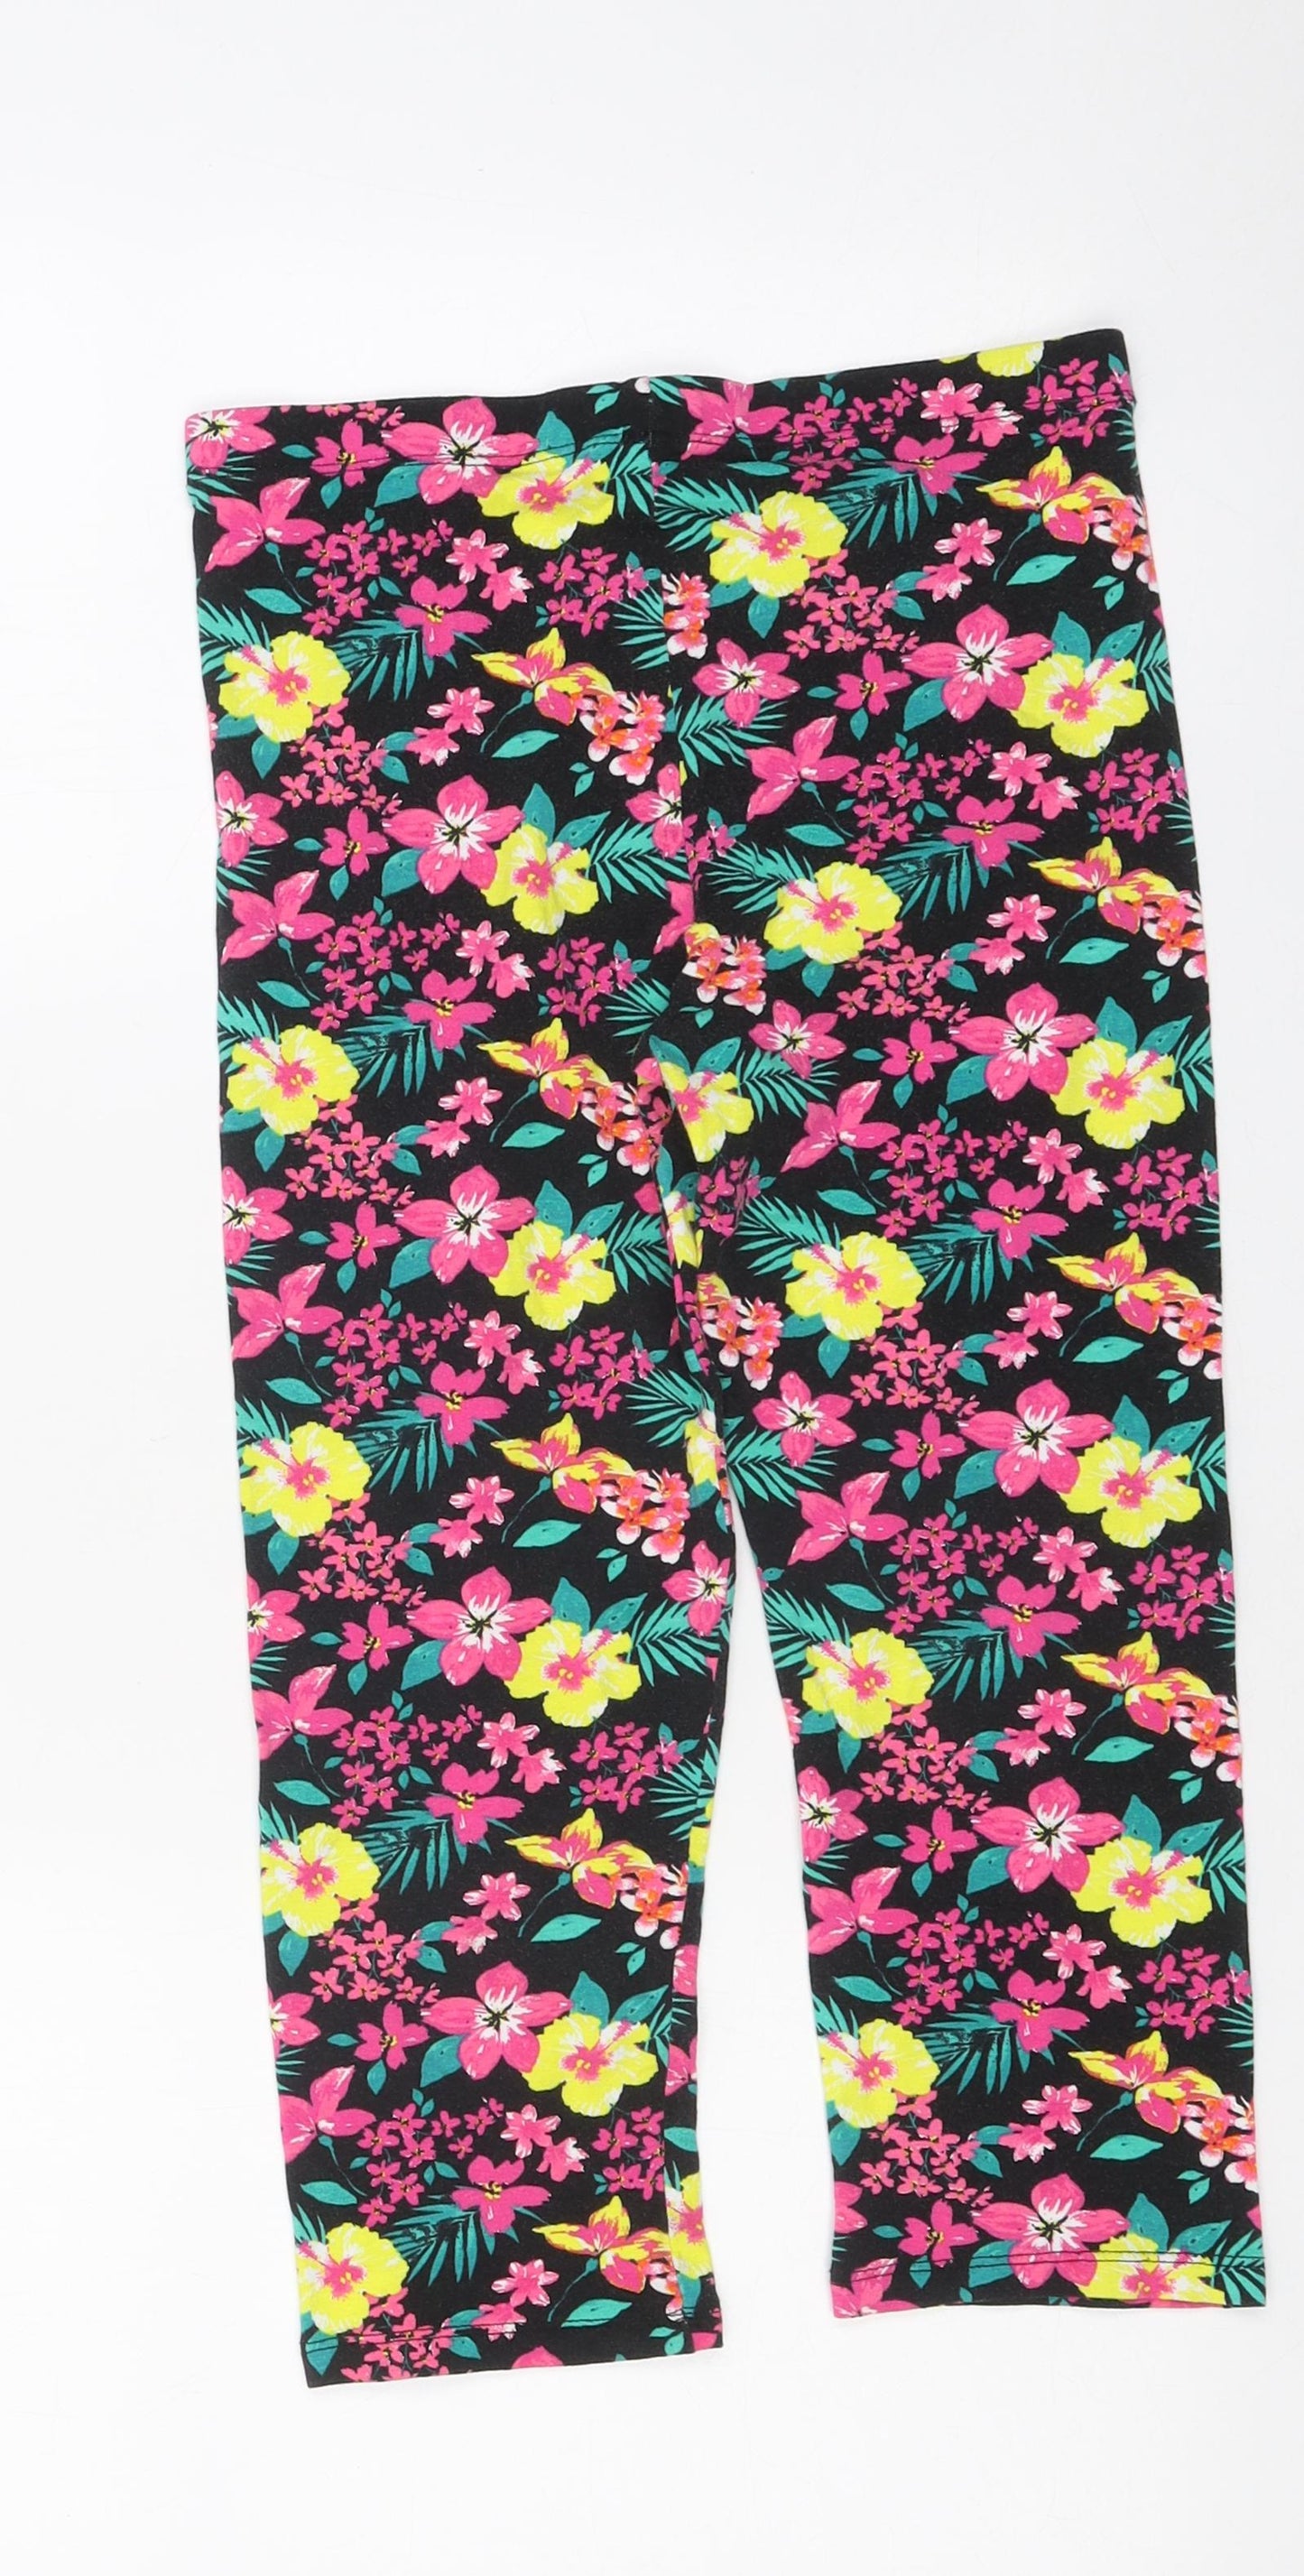 George Girls Multicoloured Floral 100% Cotton Jegging Trousers Size 12-13 Years Regular Pullover